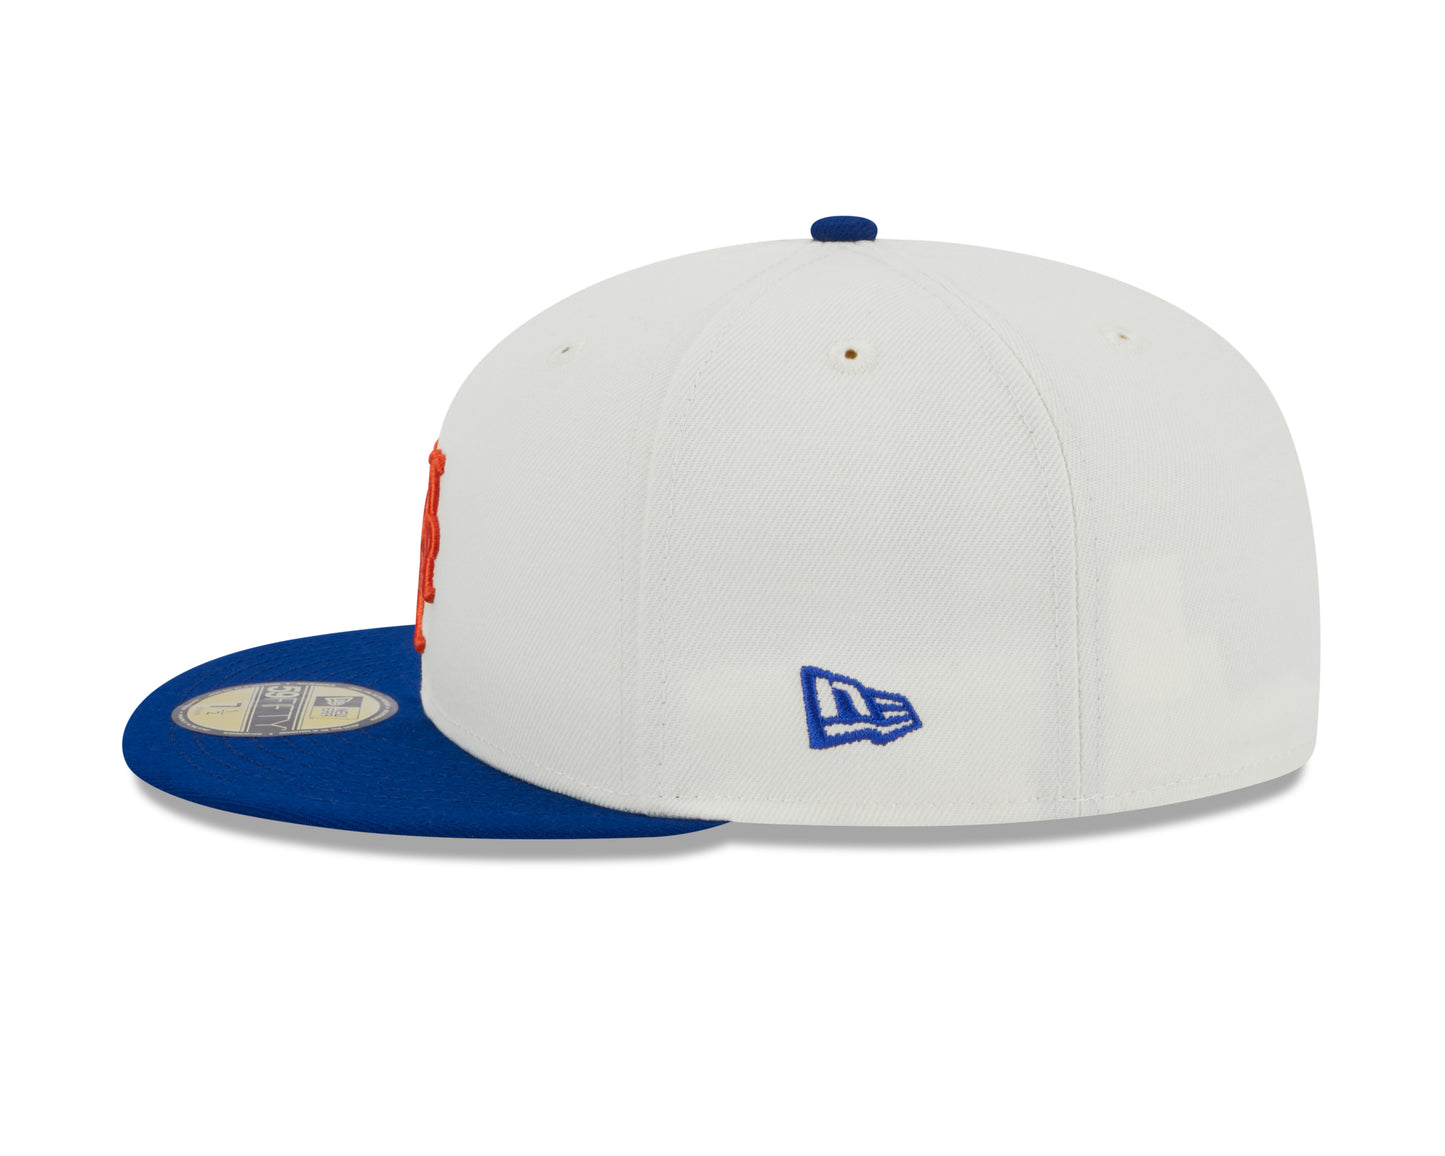 New York Mets 1982 World Series Cream/Royal New Era Retro 59FIFTY Fitted Hat